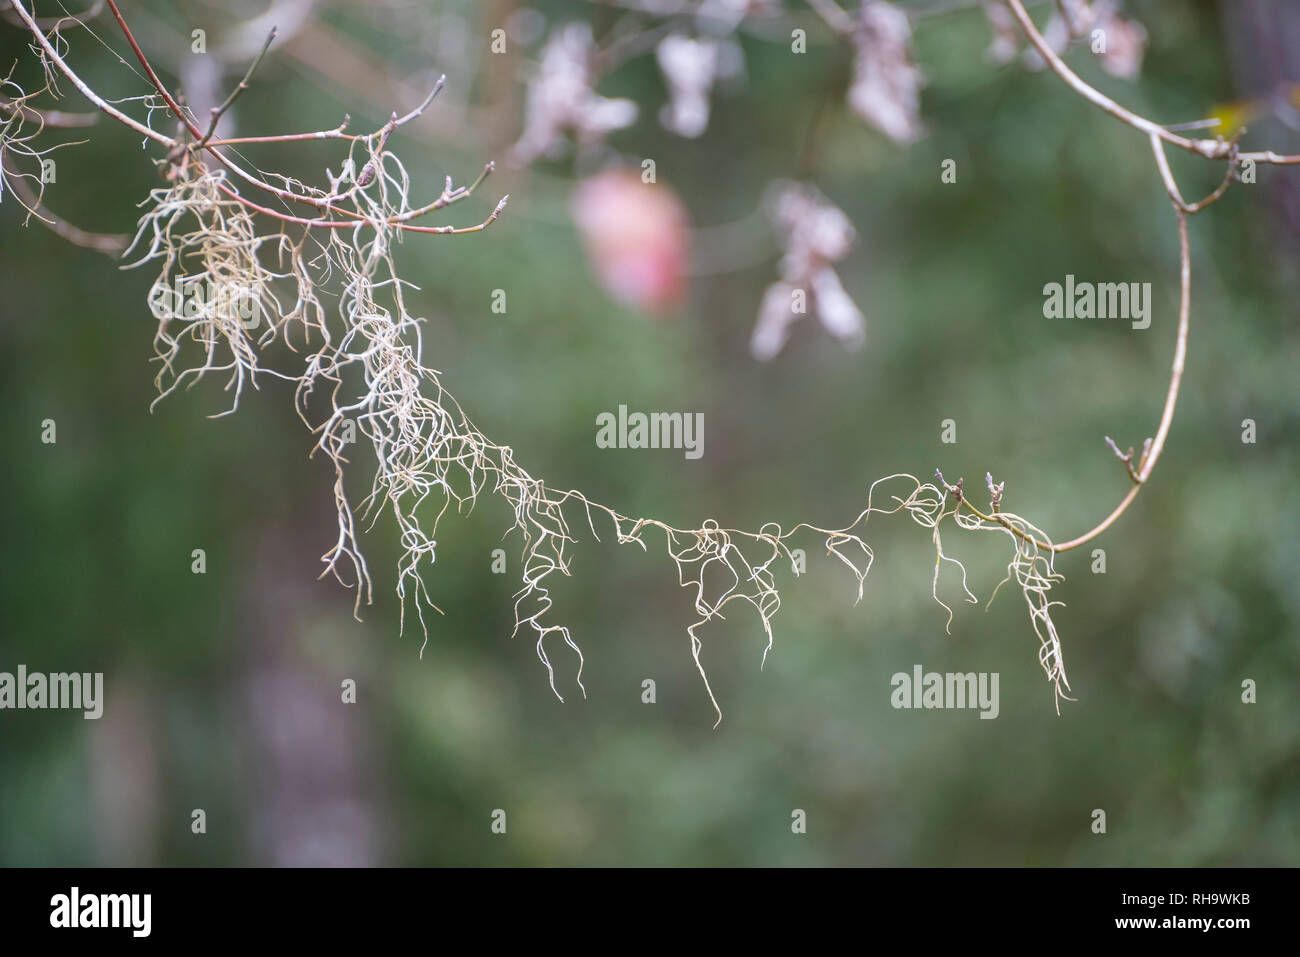 Closeup of Spanish Moss hanging from a dogwood tree branch. Tillandsia Usneoides. Stock Photo